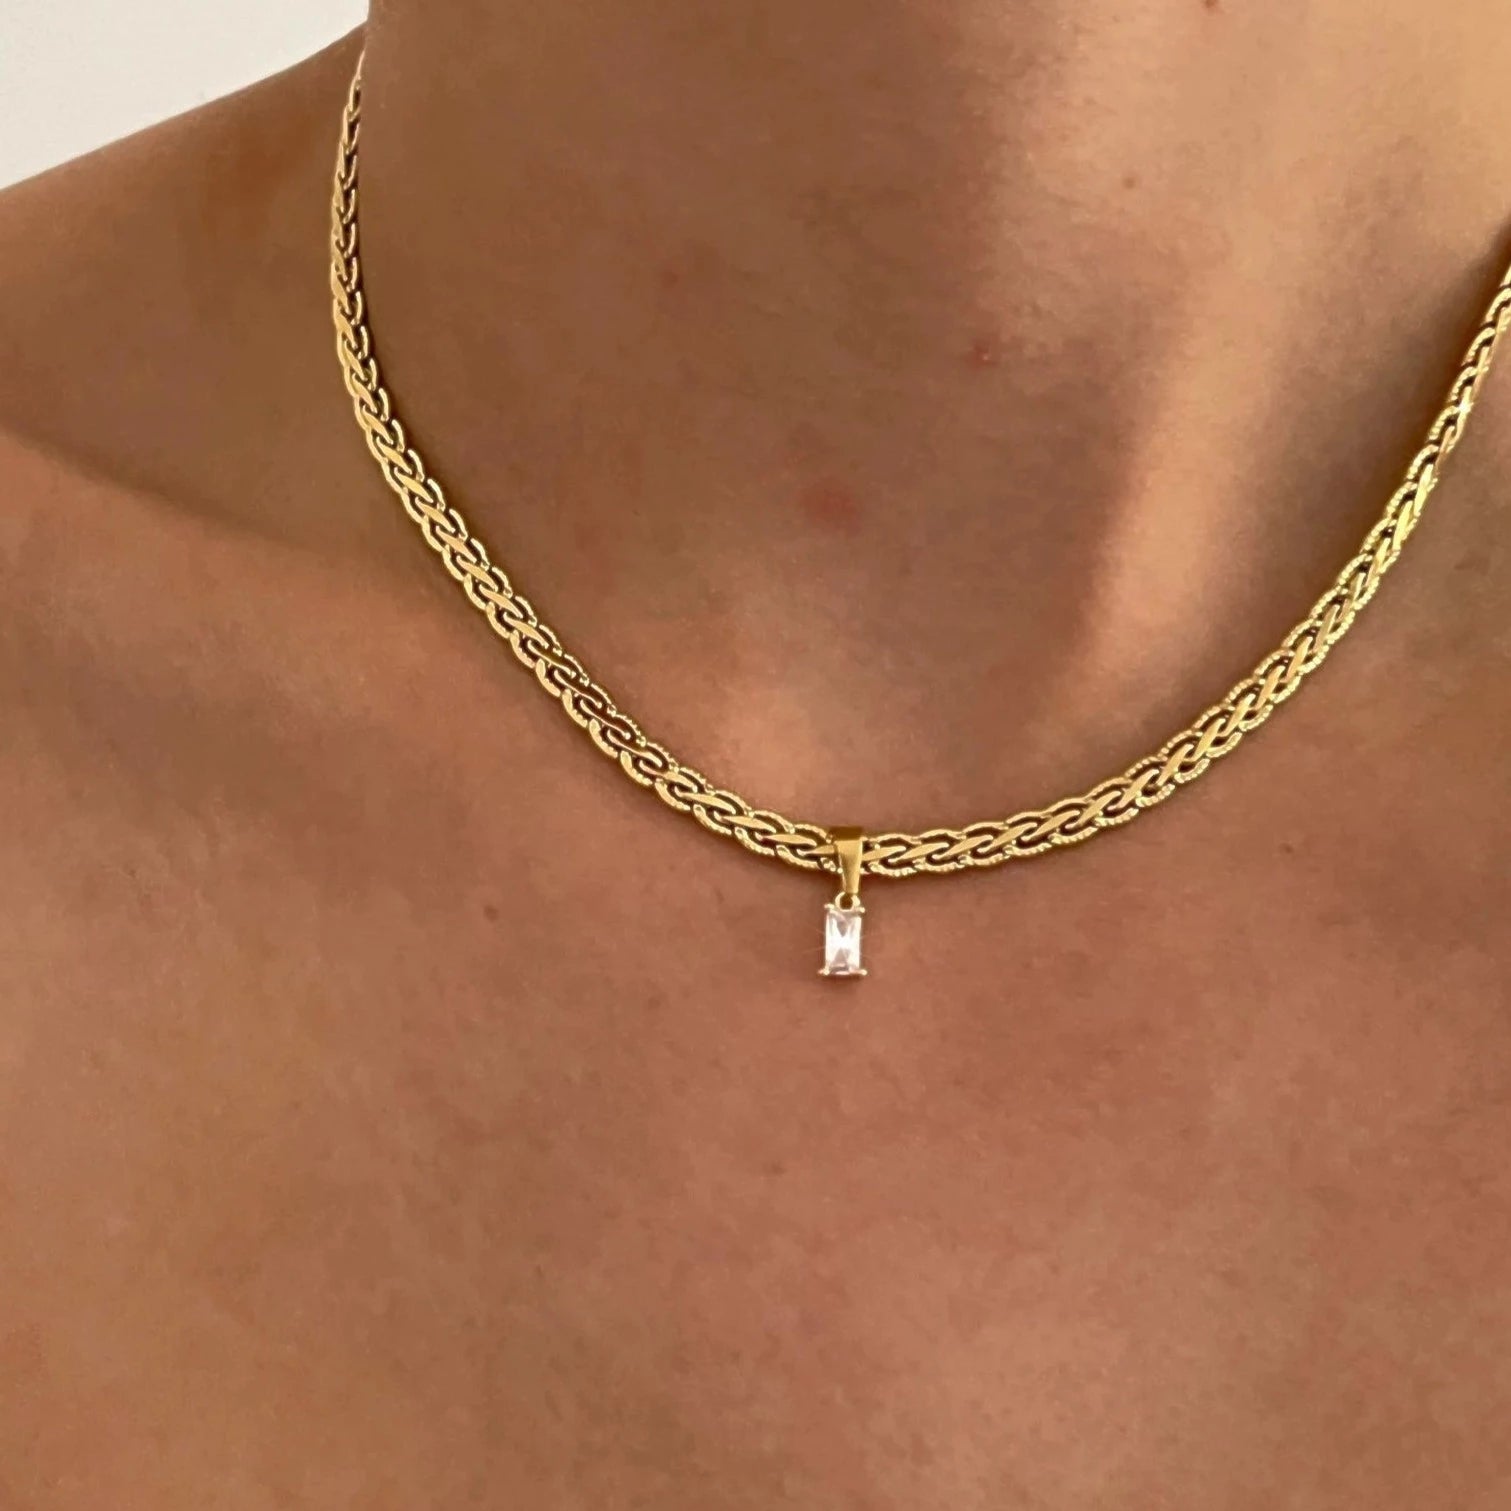 Clear Gem Necklace - Cosmic Chains 